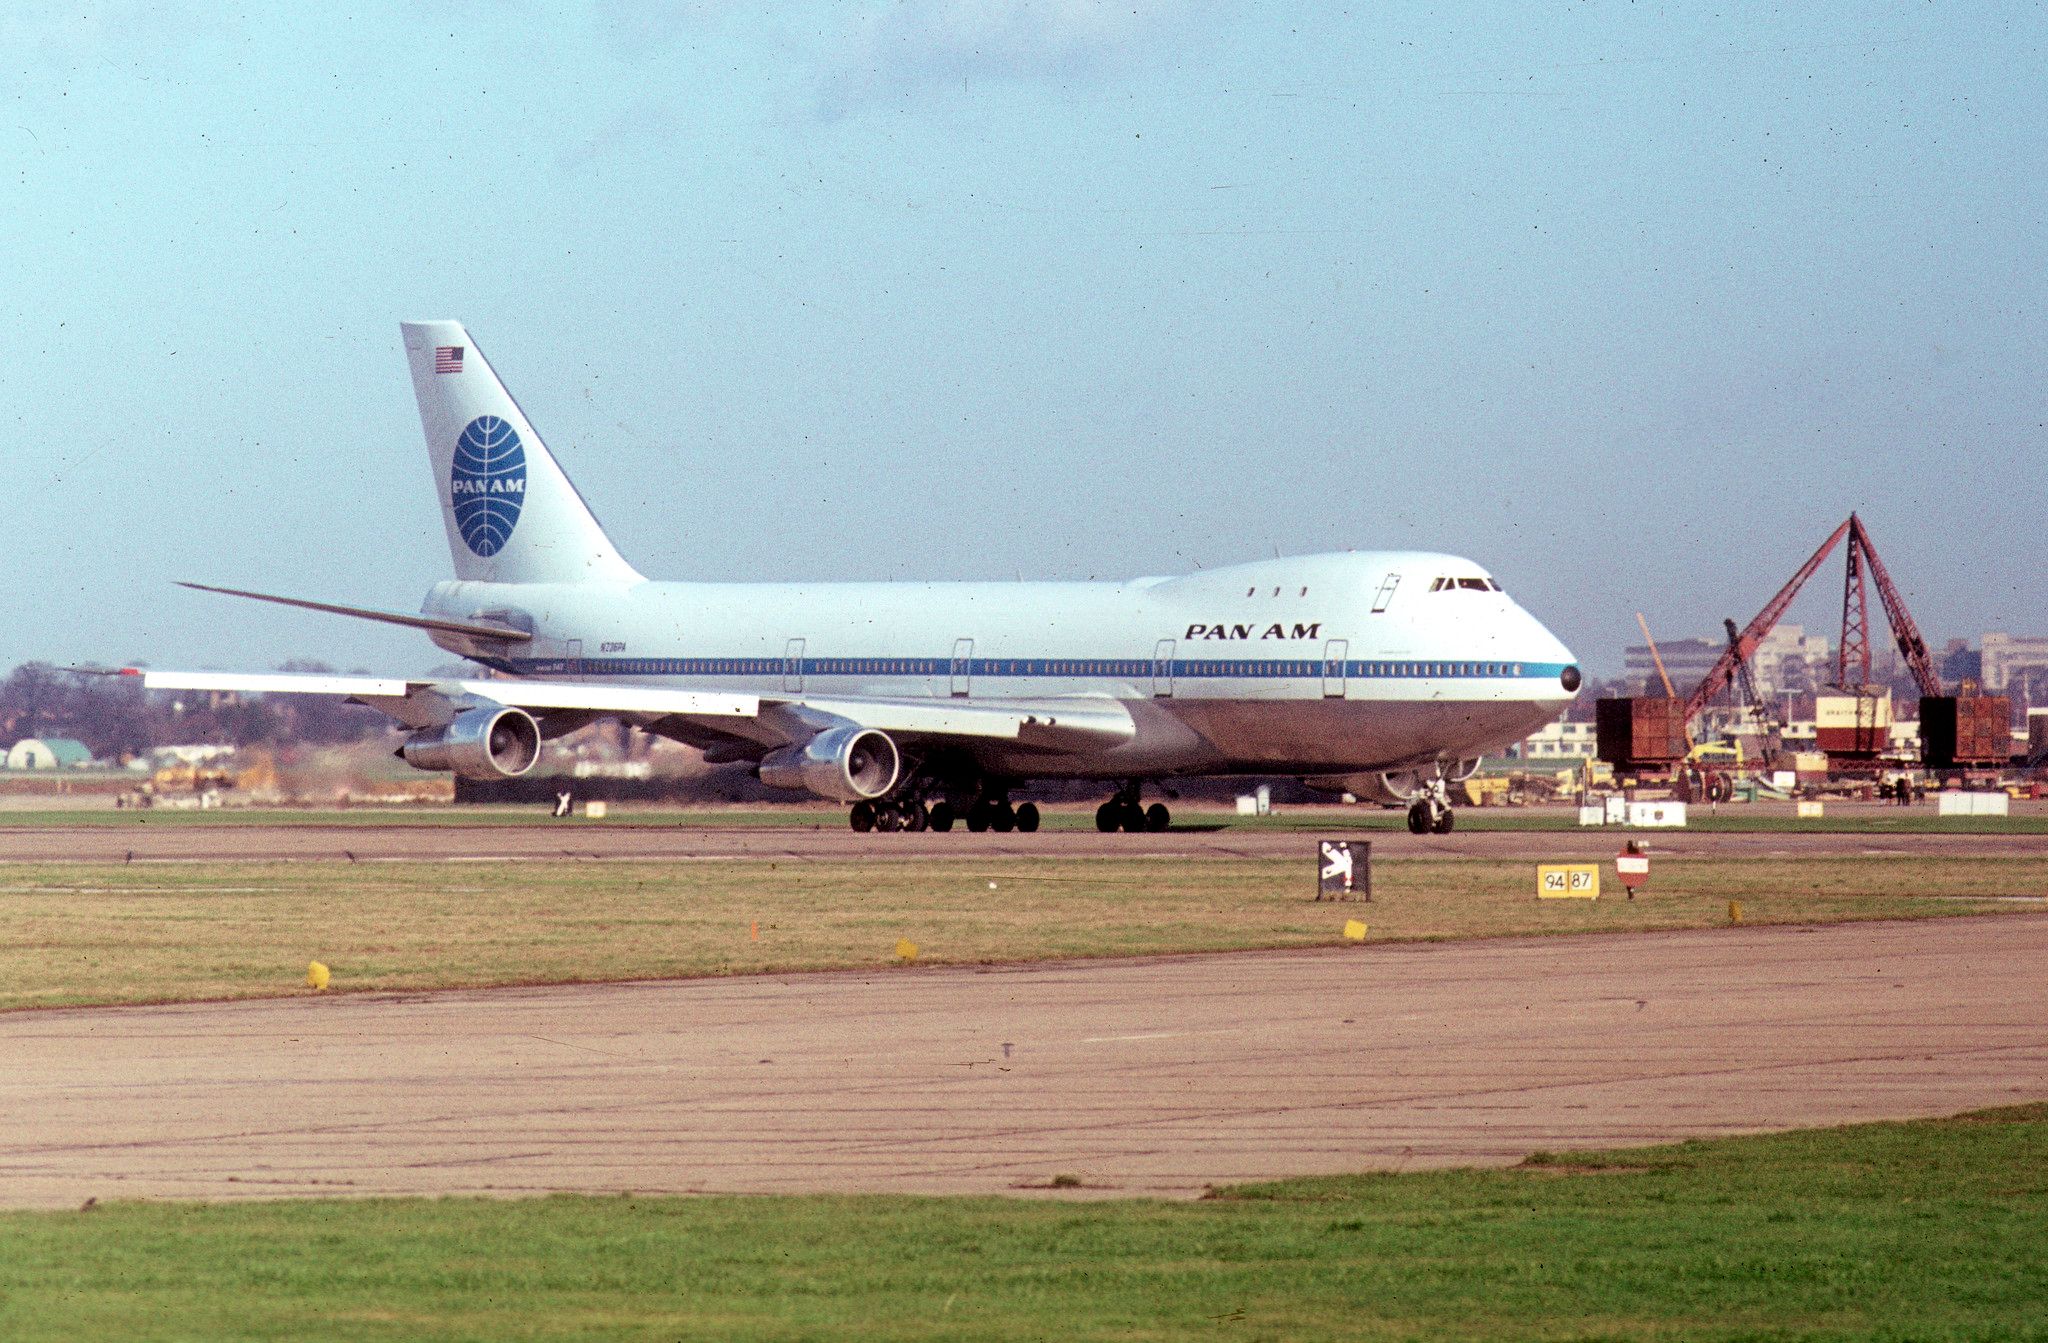 Pan Am Boeing 747 Taxiing At London Heathrow Airport